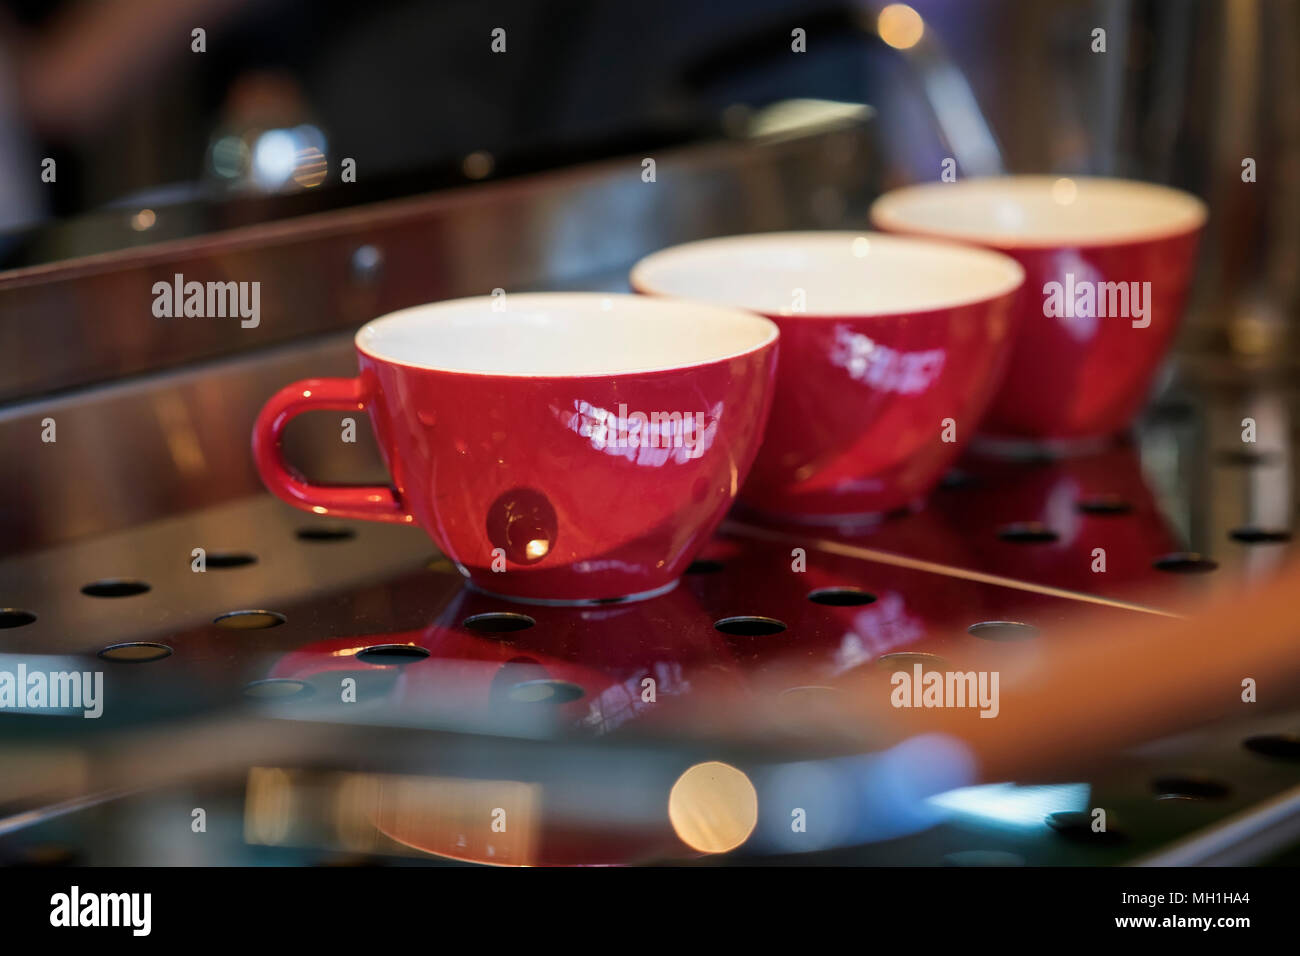 https://c8.alamy.com/comp/MH1HA4/red-cups-on-the-stand-of-the-coffee-machine-bar-vintage-dark-tone-coffee-time-for-background-use-coffee-culture-and-professional-coffee-making-s-MH1HA4.jpg